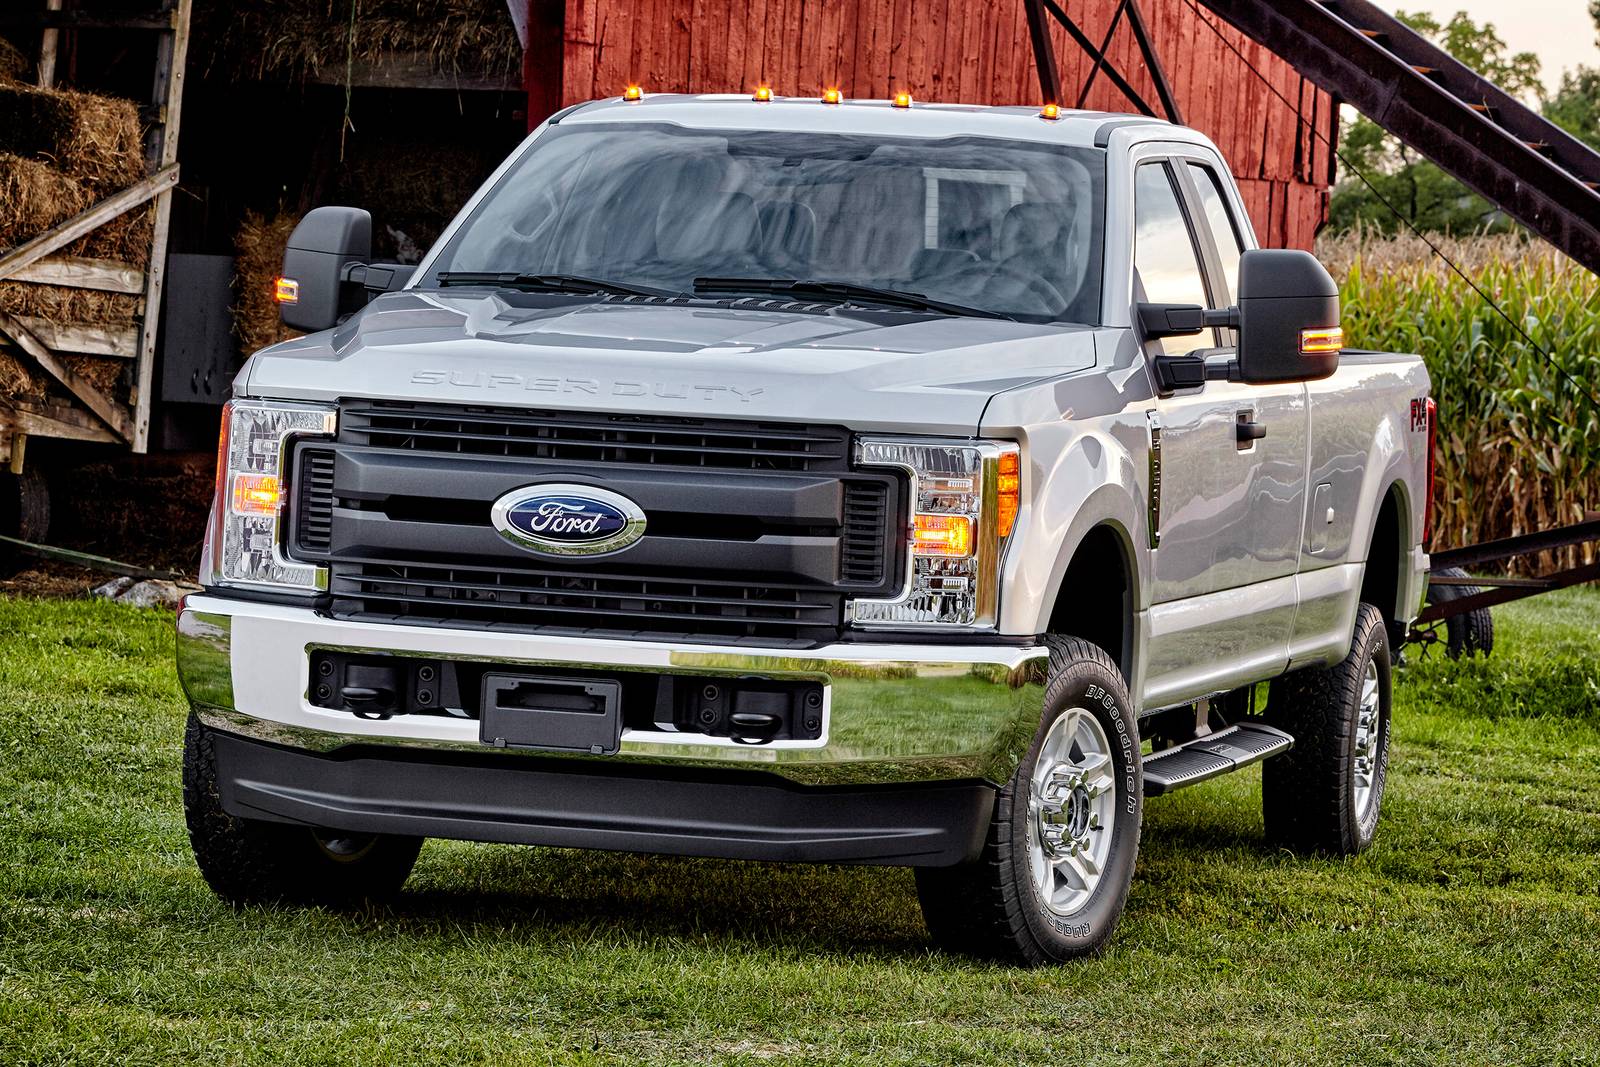 2019 Ford F-350 Super Duty Review & Ratings | Edmunds